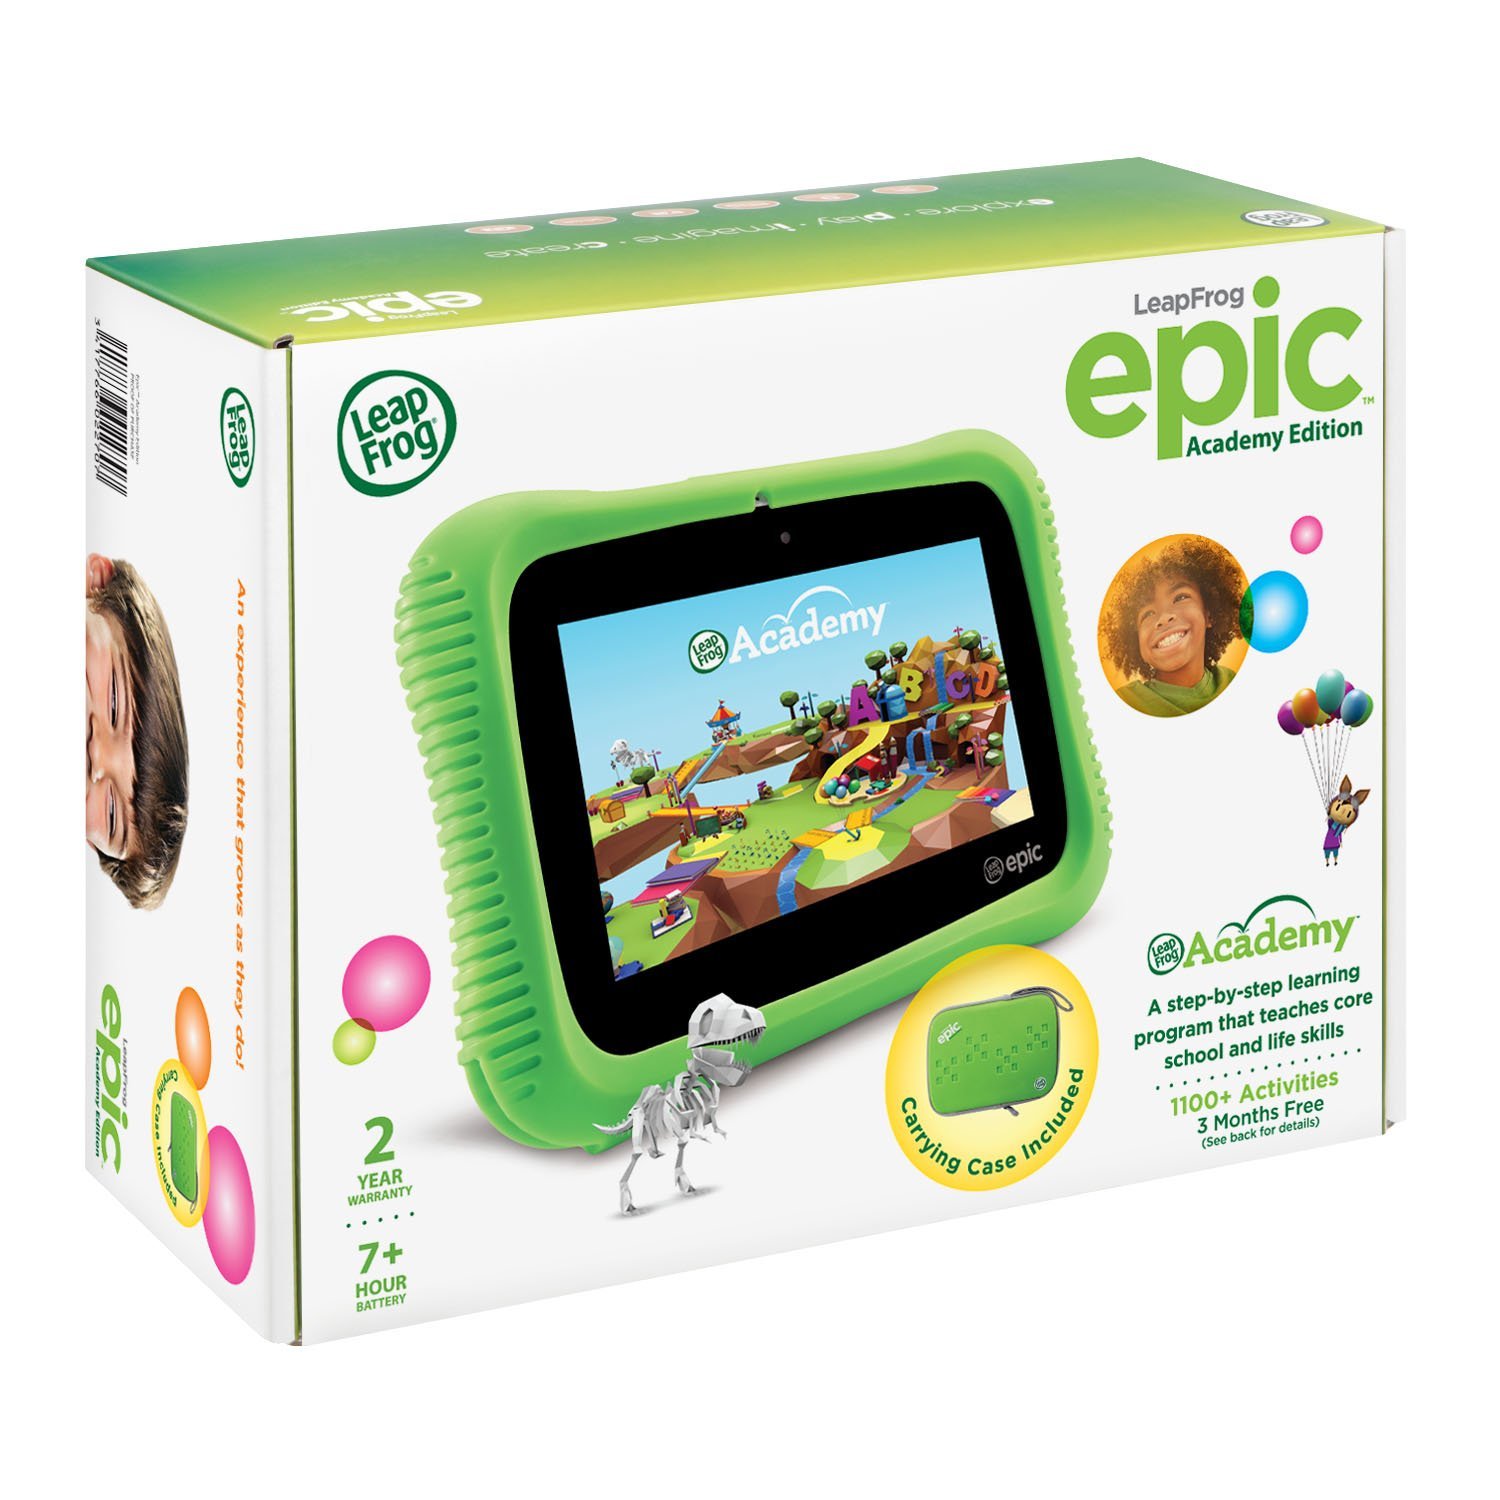 LeapFrog LeapPad Academy 7" 16GB WiFi Tablet Children's Learning Systems 6022 #2 